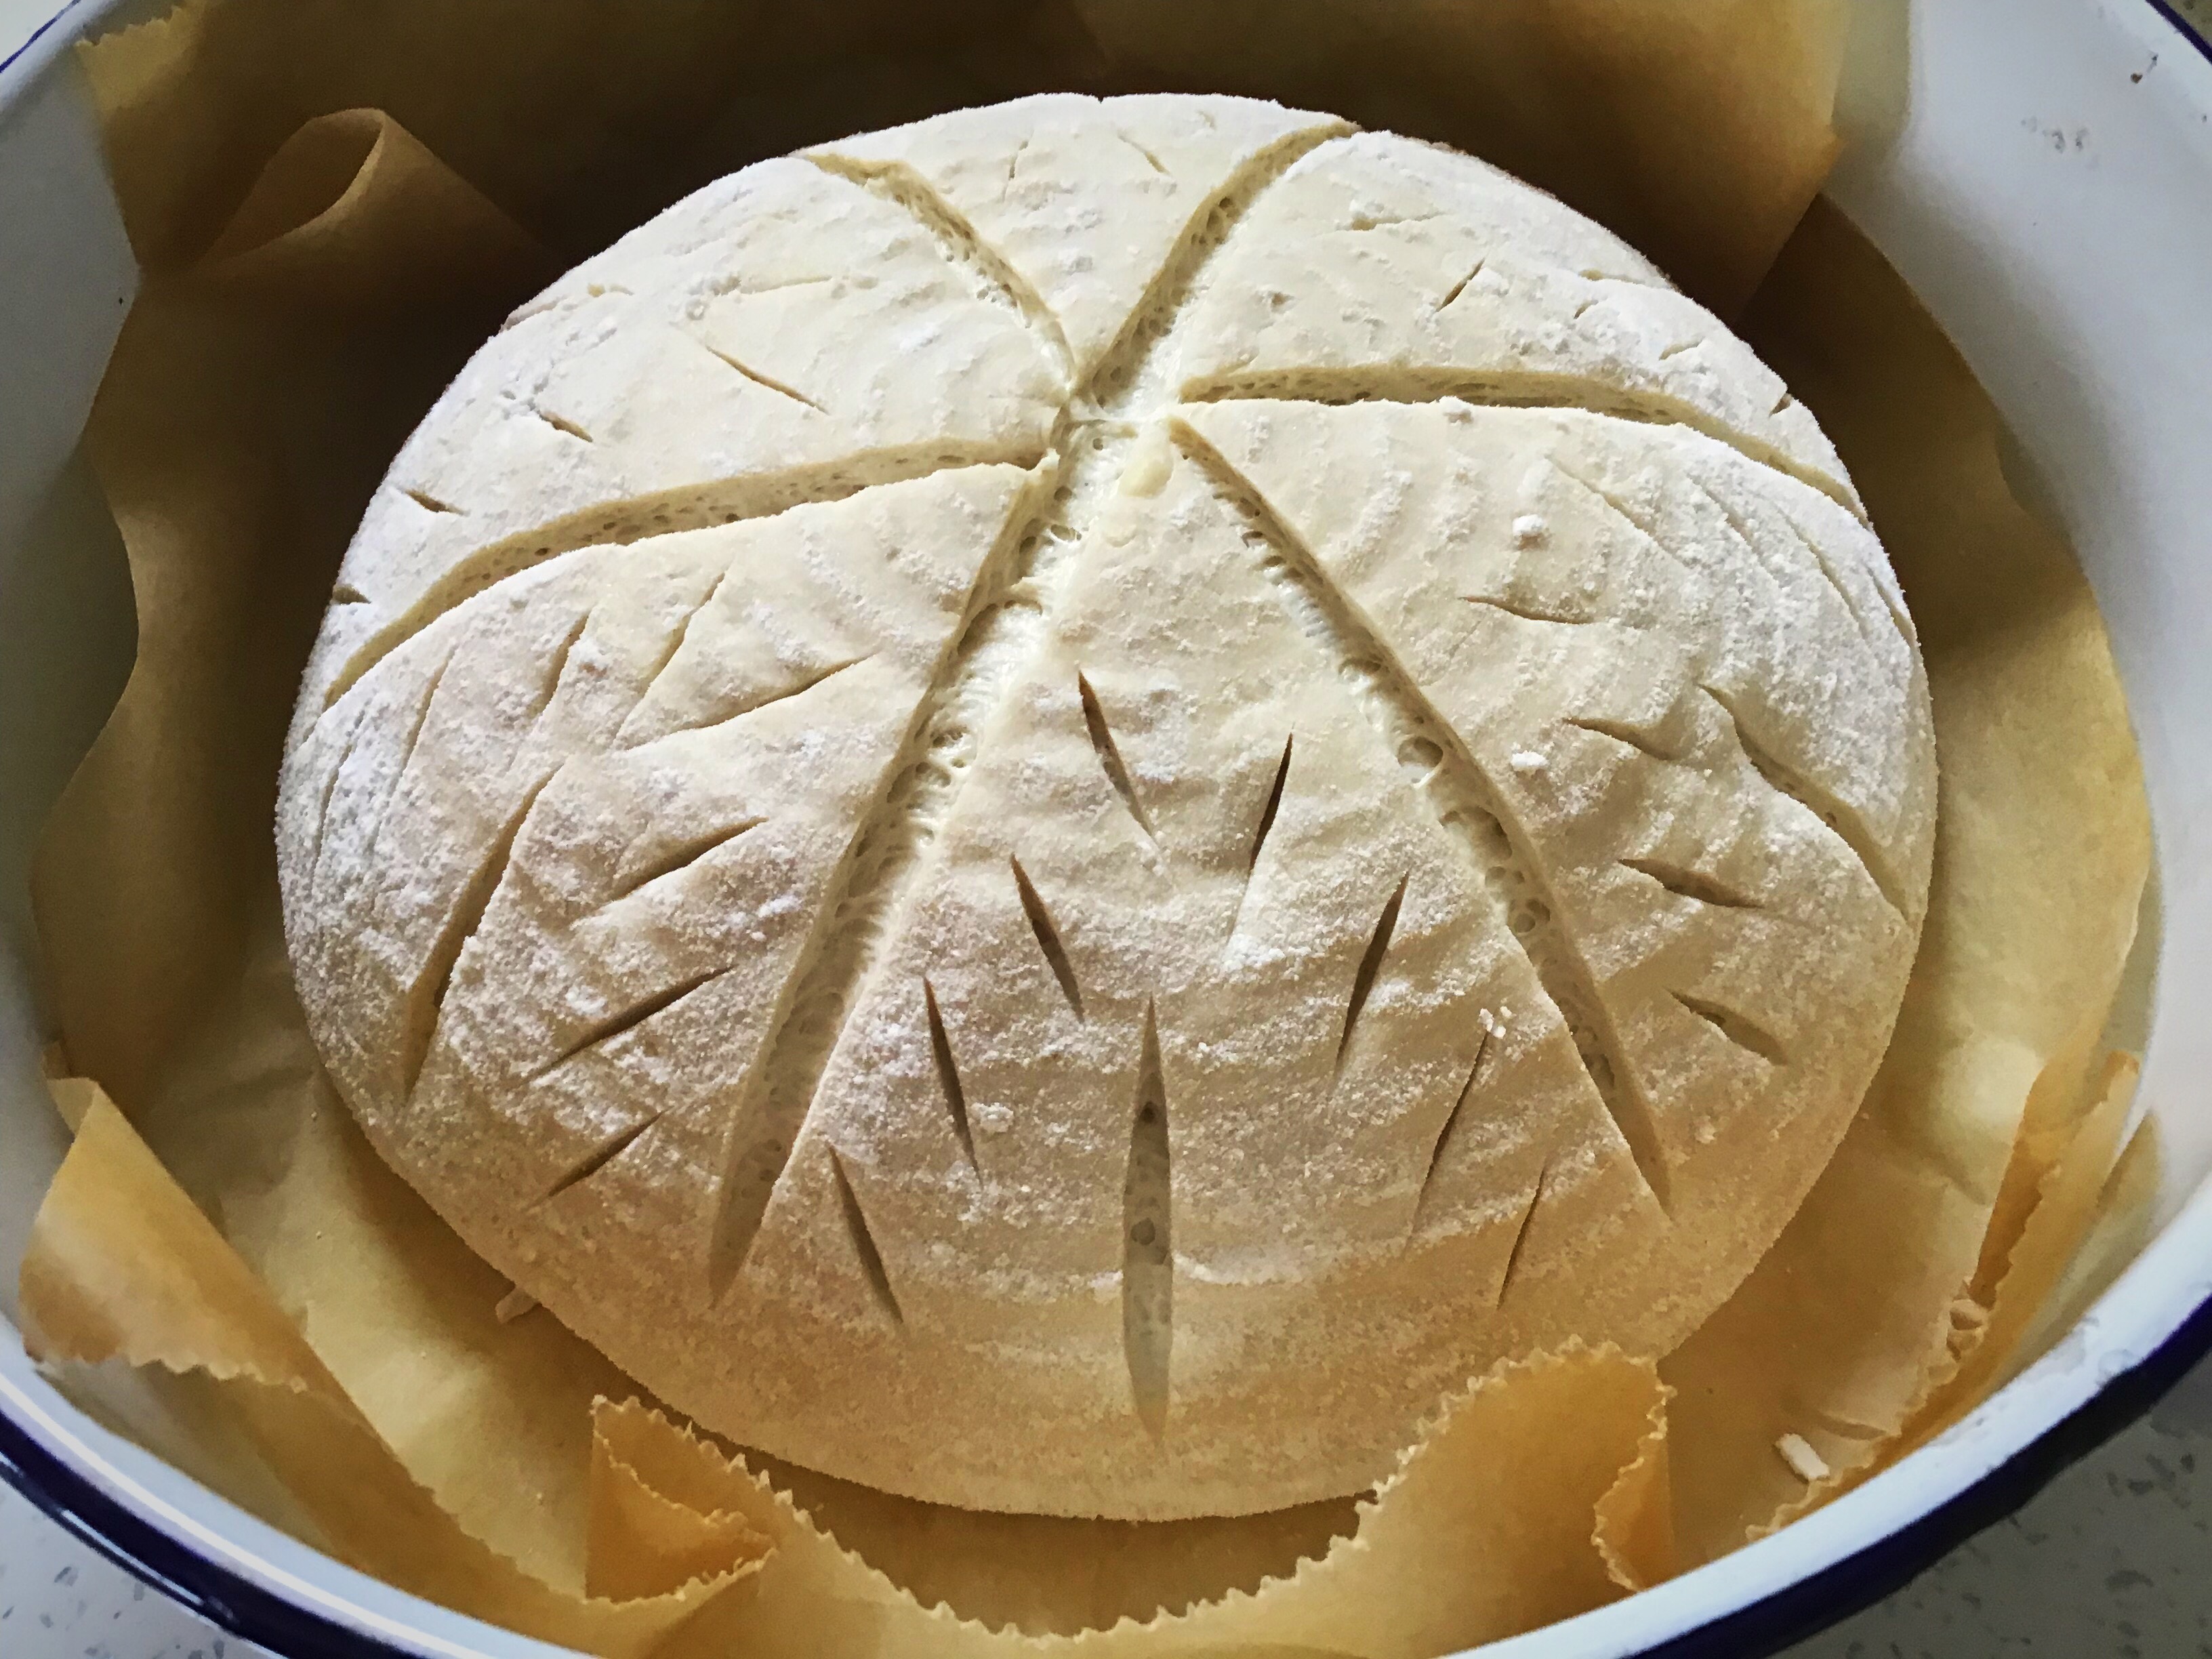 A ball of bread in the process of being baked.